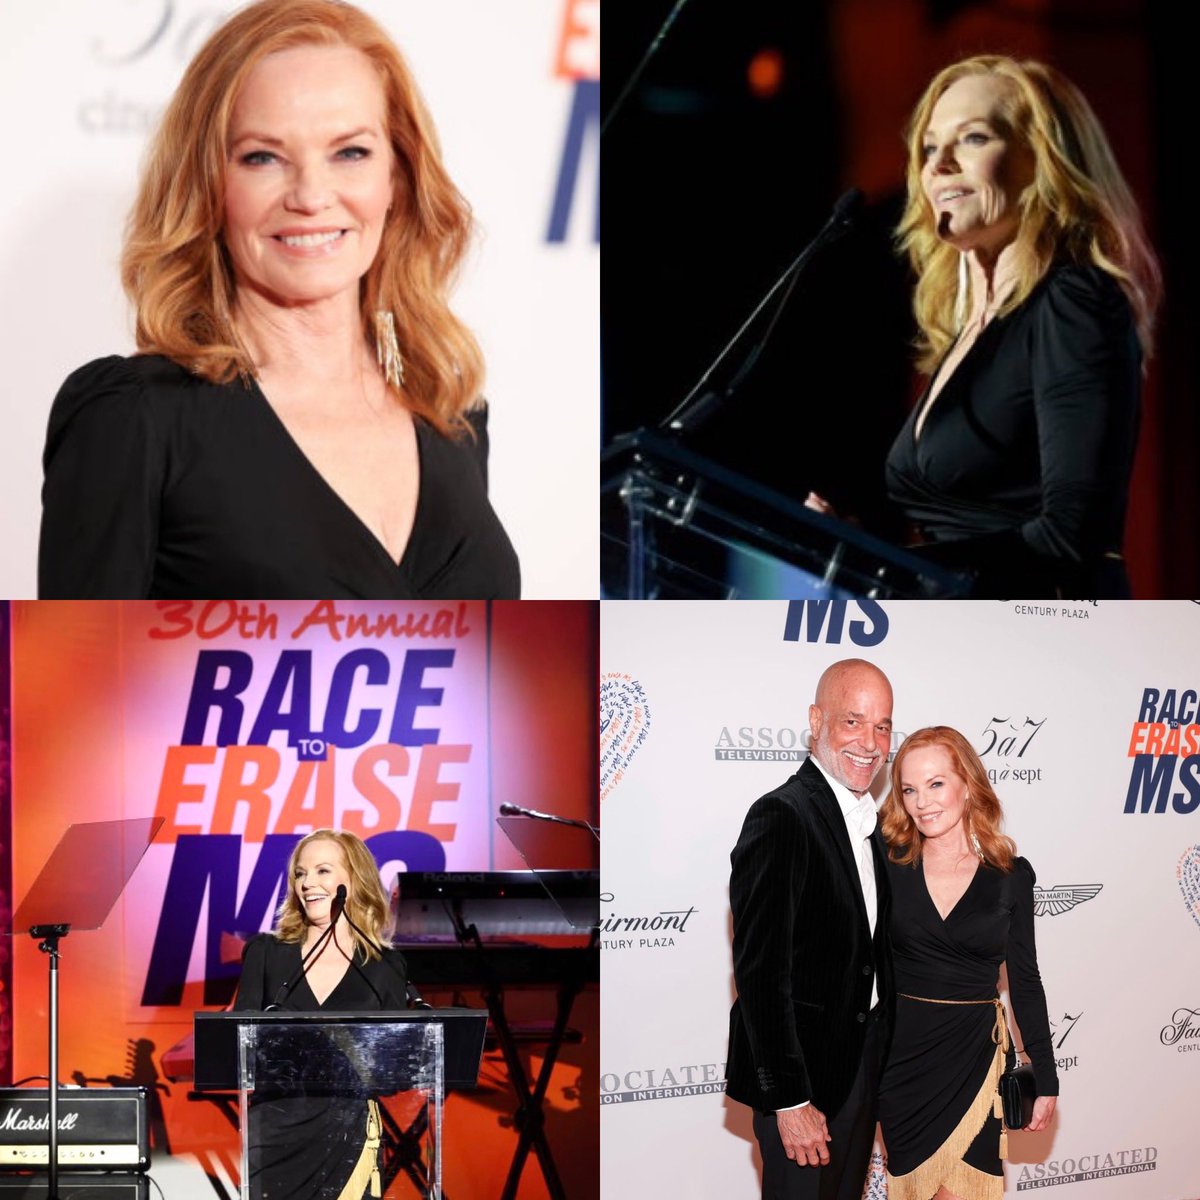 A few pics of Marg and her hubby from this year’s Race to Erase MS event. 🧡
#marghelgenberger #csivegas